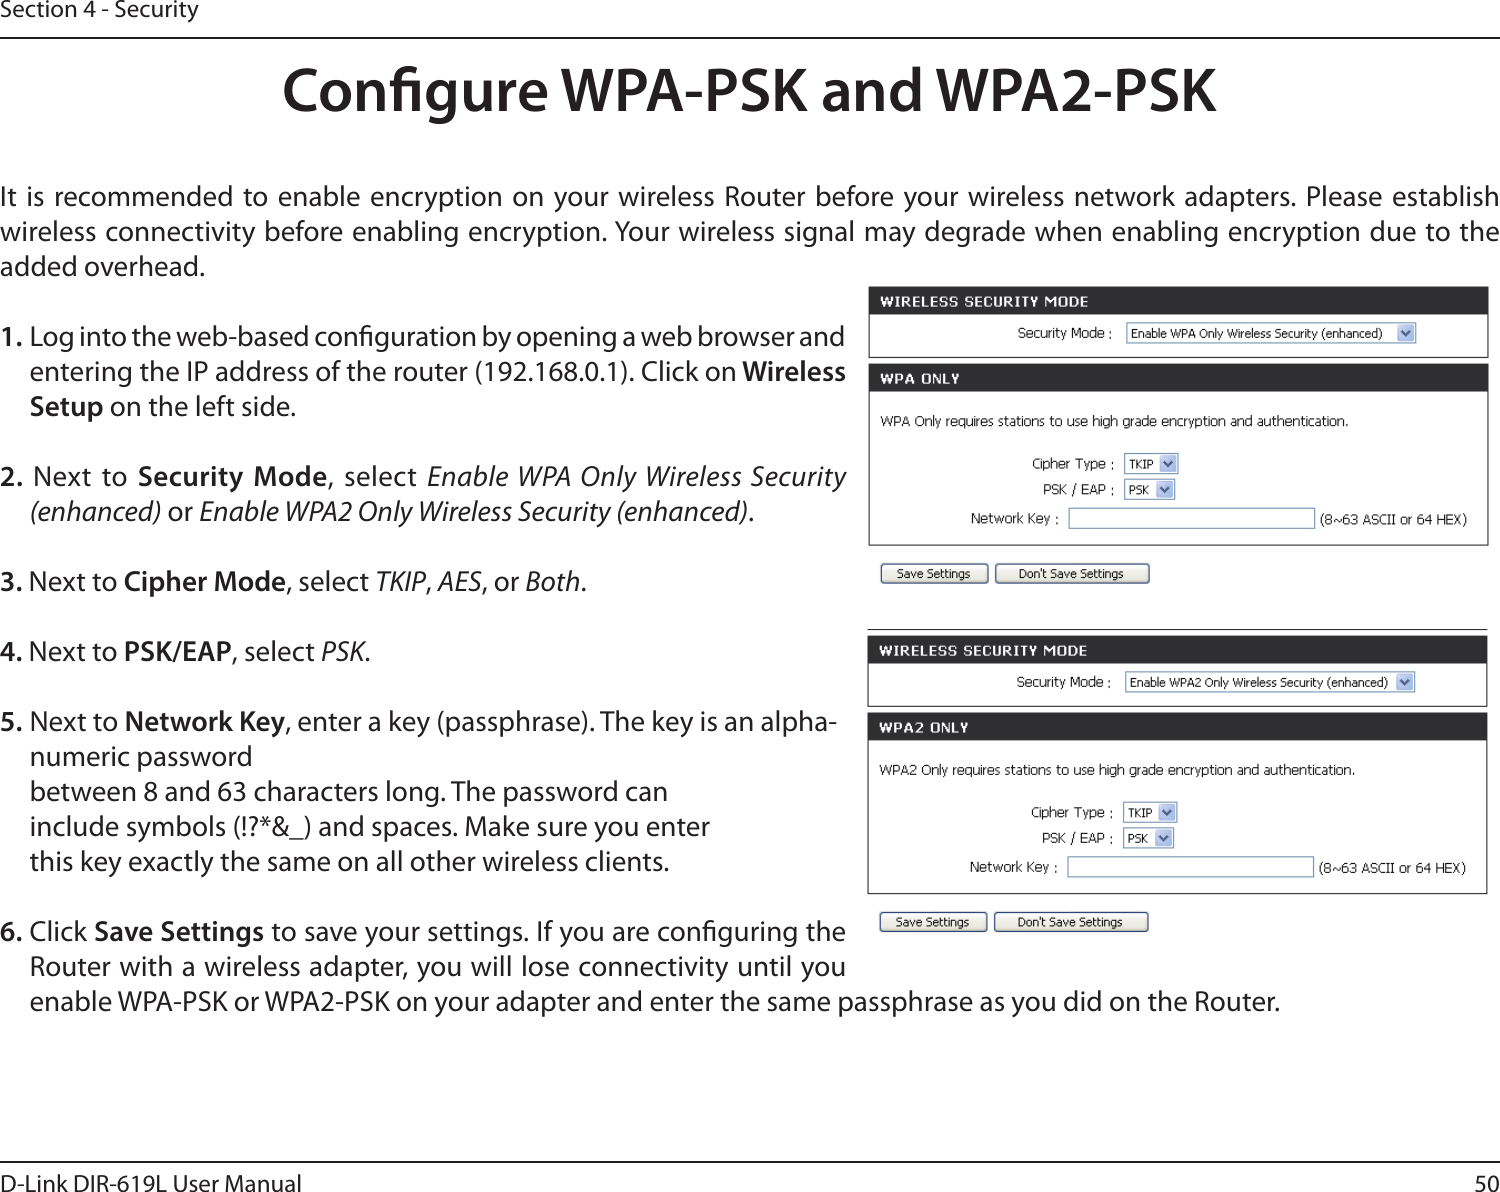 50D-Link DIR-619L User ManualSection 4 - SecurityCongure WPA-PSK and WPA2-PSKIt  is recommended to enable encryption  on your wireless  Router before your wireless network adapters. Please establish wireless connectivity before enabling encryption. Your wireless signal may degrade when enabling encryption due to the added overhead.1. Log into the web-based conguration by opening a web browser and entering the IP address of the router (192.168.0.1). Click on Wireless Setup on the left side.2.  Next  to  Security Mode, select Enable WPA Only Wireless Security (enhanced) or Enable WPA2 Only Wireless Security (enhanced).3. Next to Cipher Mode, select TKIP, AES, or Both.4. Next to PSK/EAP, select PSK.5. Next to Network Key, enter a key (passphrase). The key is an alpha-numeric password between 8 and 63 characters long. The password can include symbols (!?*&amp;_) and spaces. Make sure you enter this key exactly the same on all other wireless clients.6. Click Save Settings to save your settings. If you are conguring the Router with a wireless adapter, you will lose connectivity until you enable WPA-PSK or WPA2-PSK on your adapter and enter the same passphrase as you did on the Router.